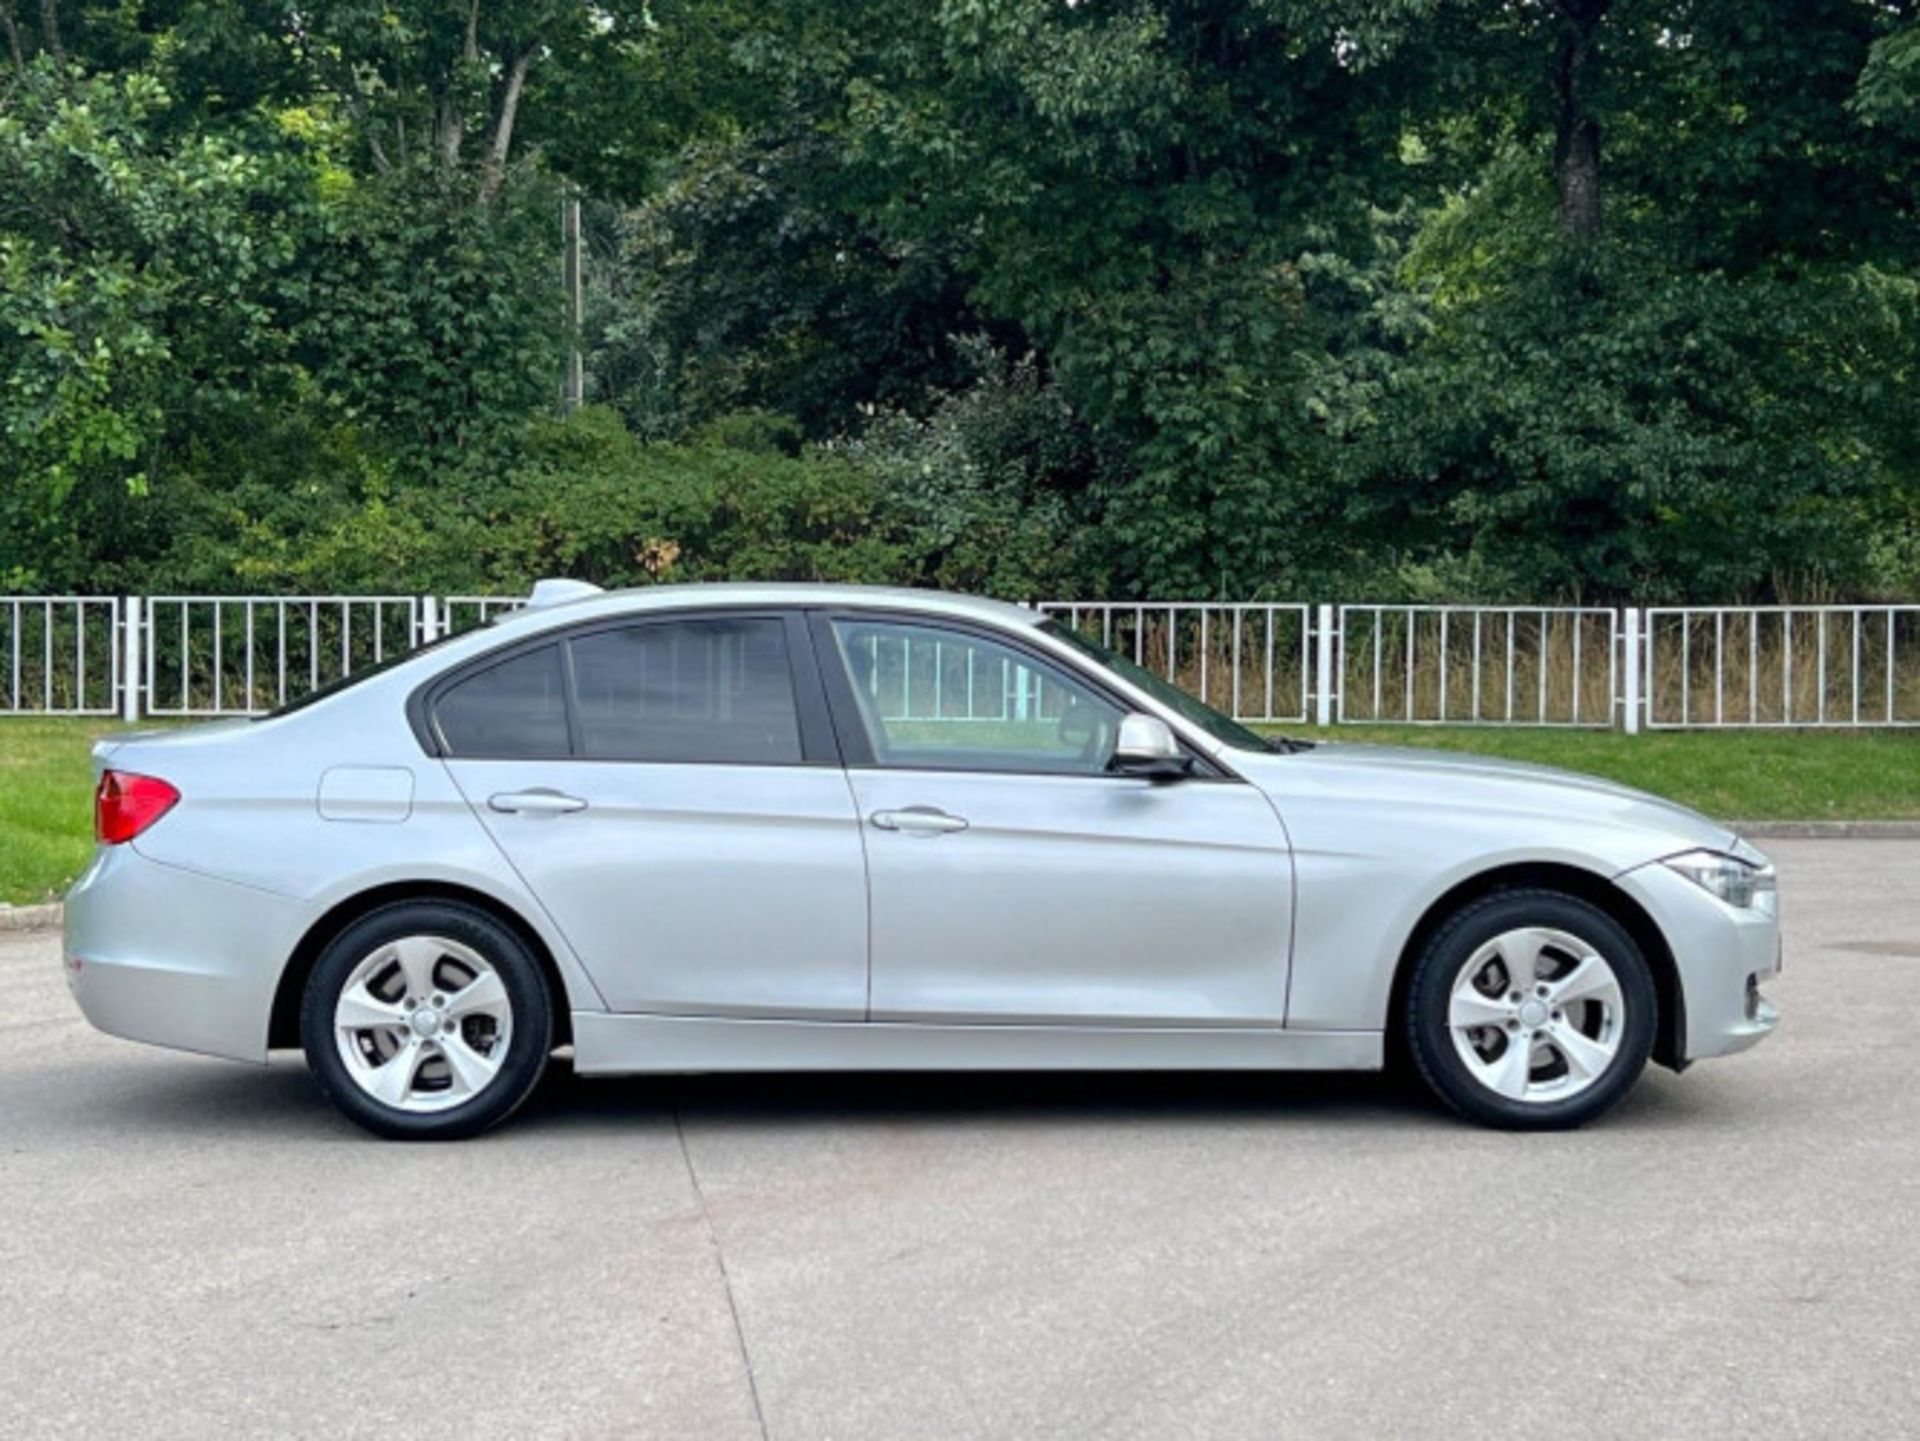 BMW 3 SERIES 2.0 DIESEL ED START STOP - A WELL-MAINTAINED GEM >>--NO VAT ON HAMMER--<< - Image 5 of 229